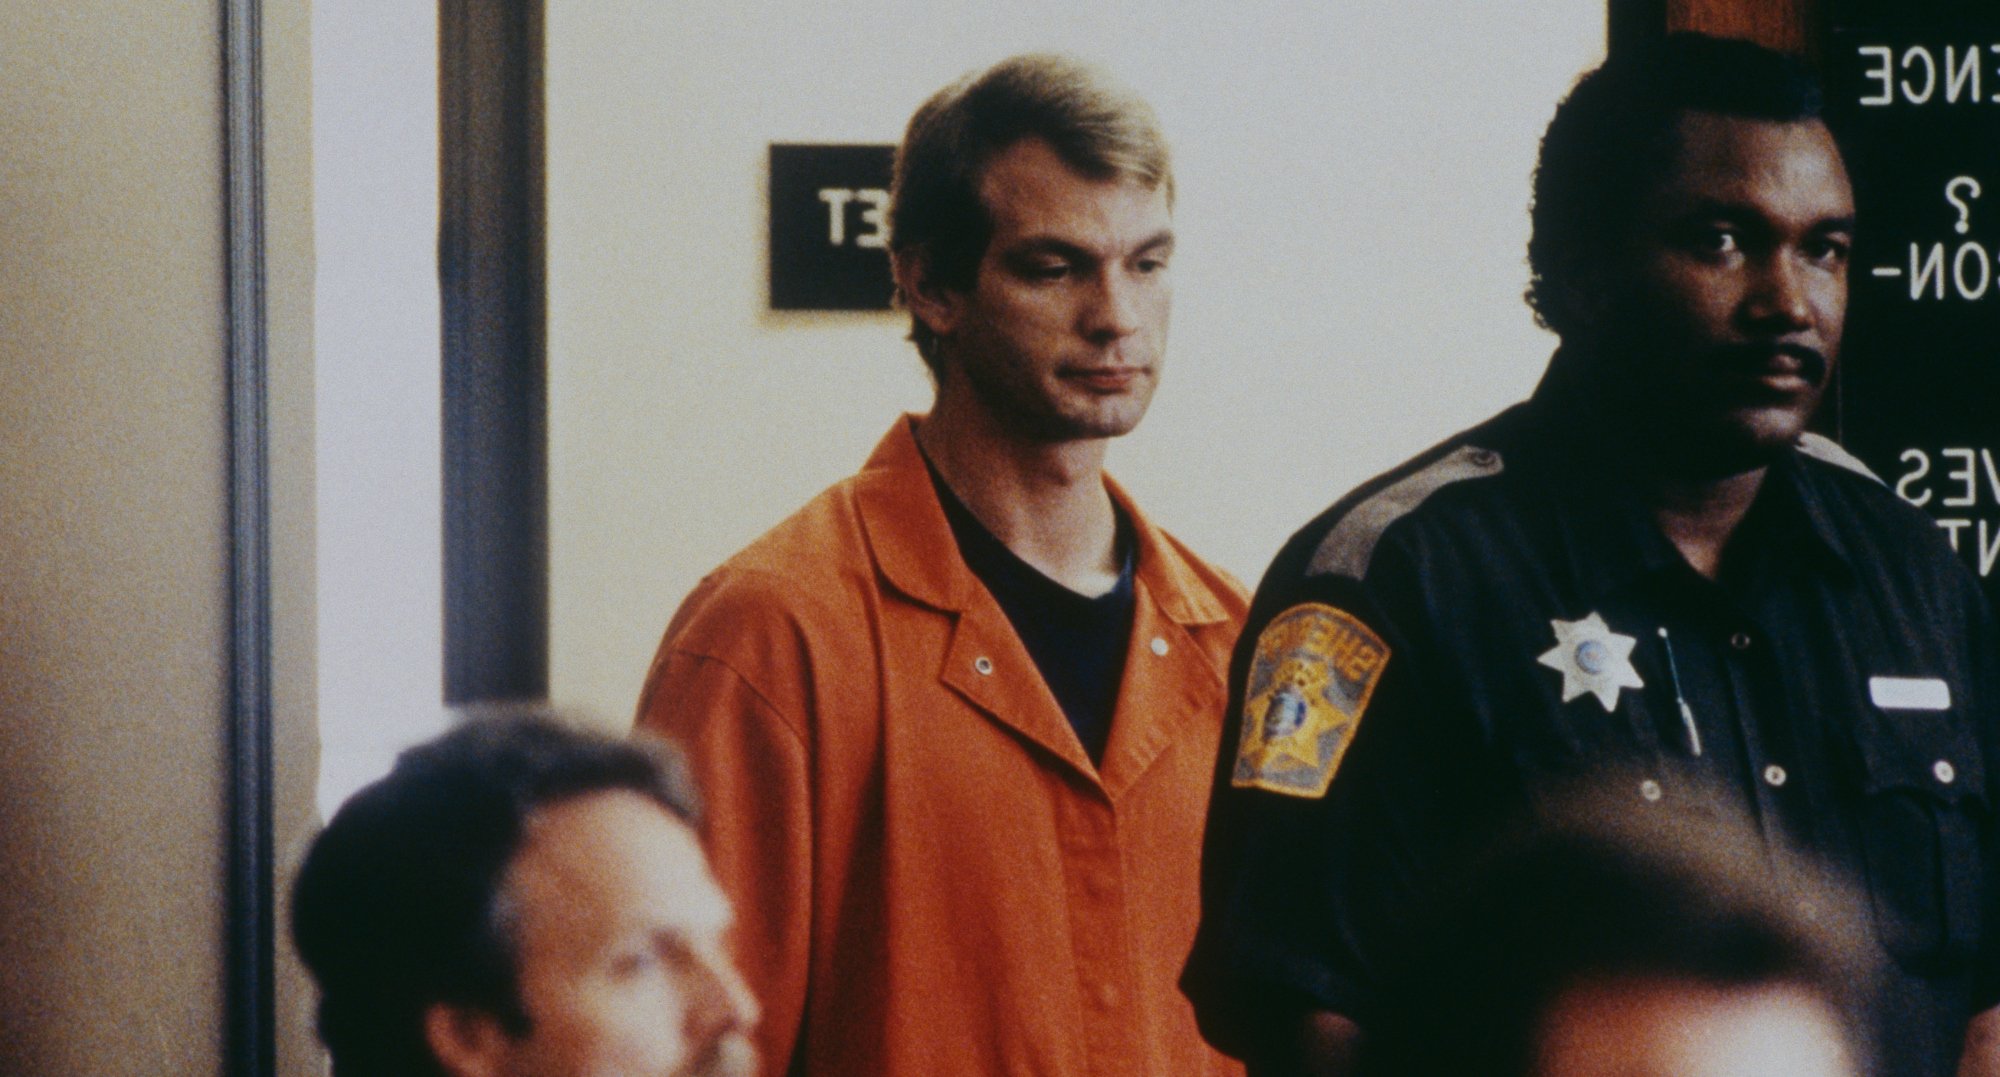 'Conversations With a Killer The Jeffrey Dahmer Tapes' centers on Milwaukee killer Jeffrey Dahmer.